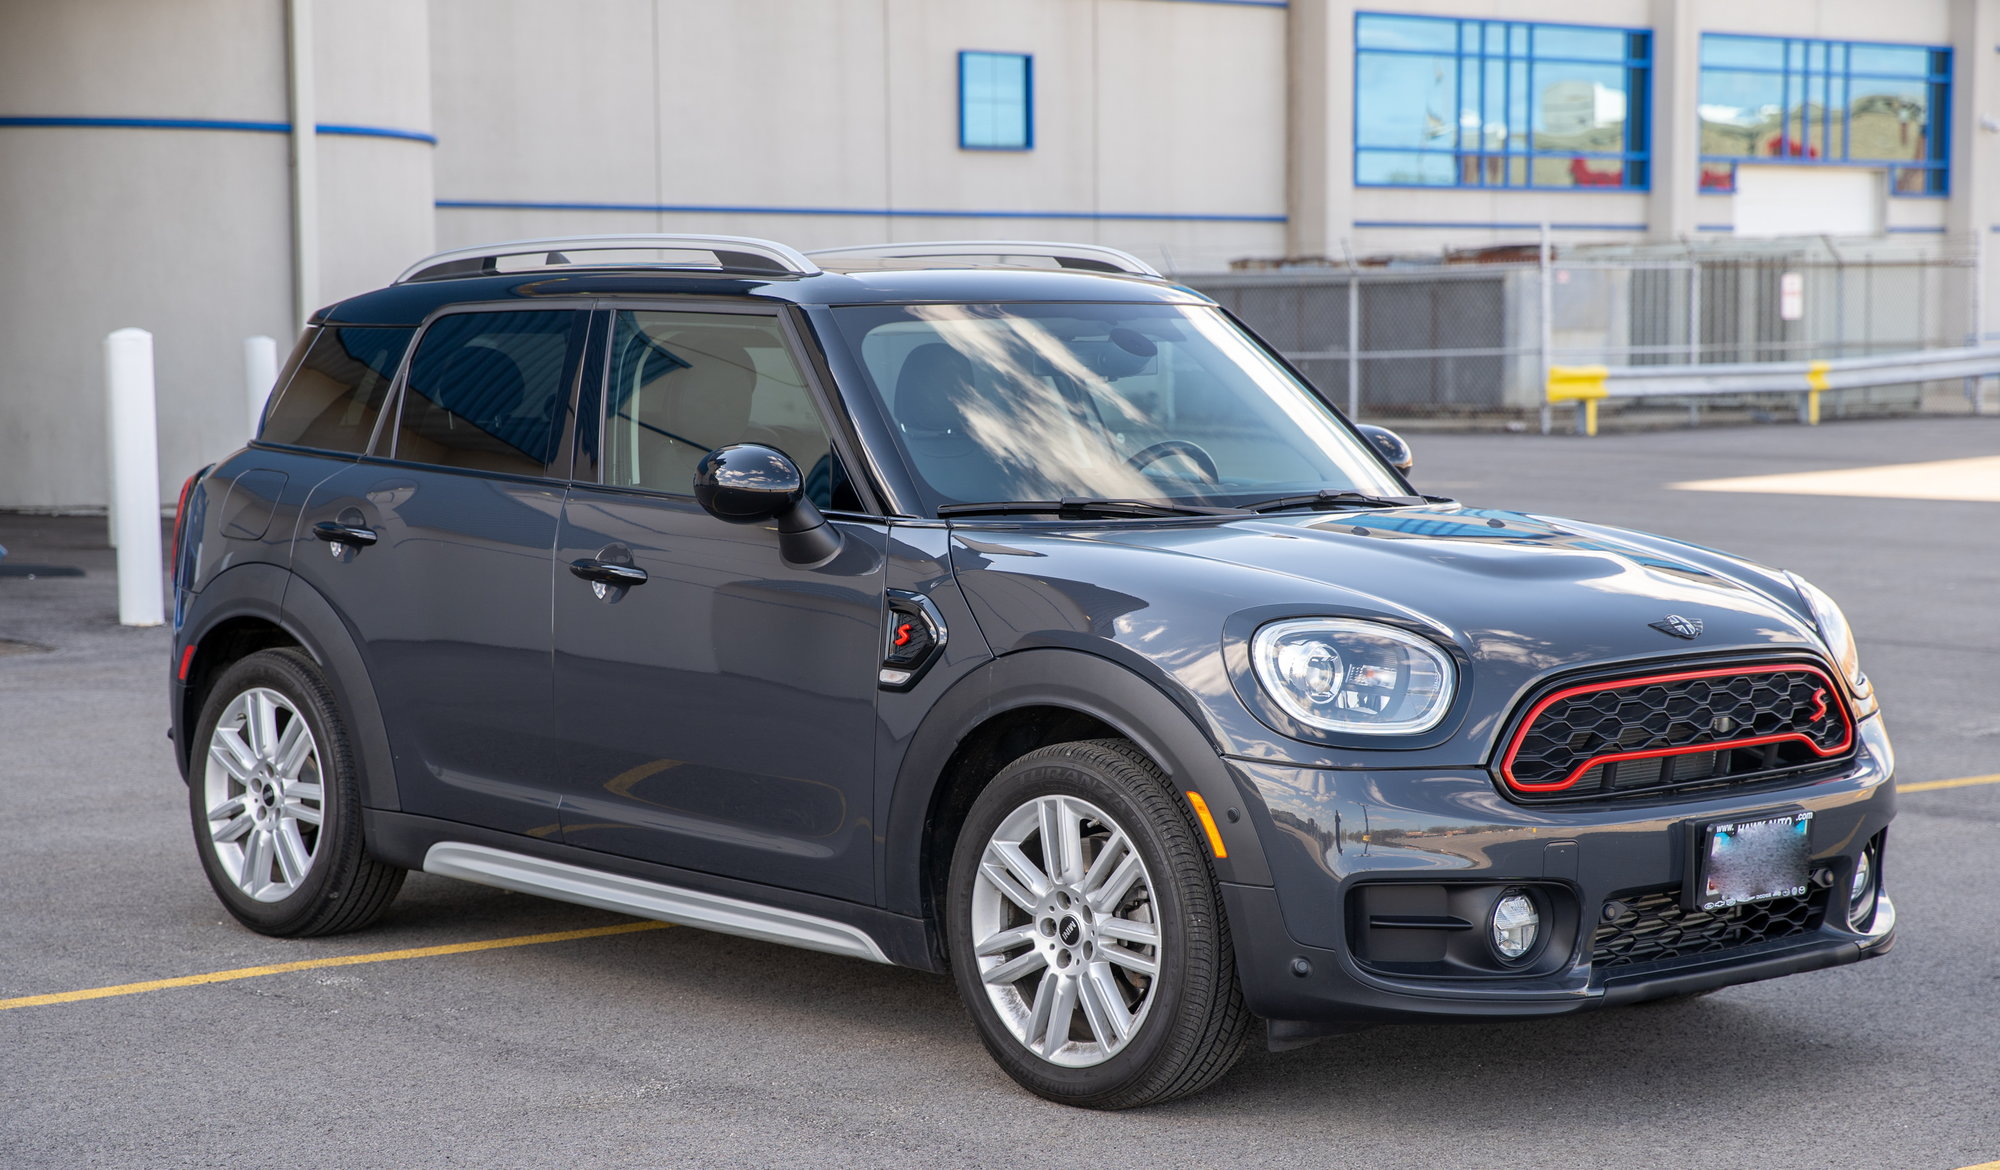 2018 Mini Cooper Countryman - 2018 countryman S all 4 thunder grey. fully loaded - Used - VIN WMZYT5C3XJ3E61917 - 25,900 Miles - AWD - Automatic - SUV - Gray - Des Plaines, IL 60016, United States